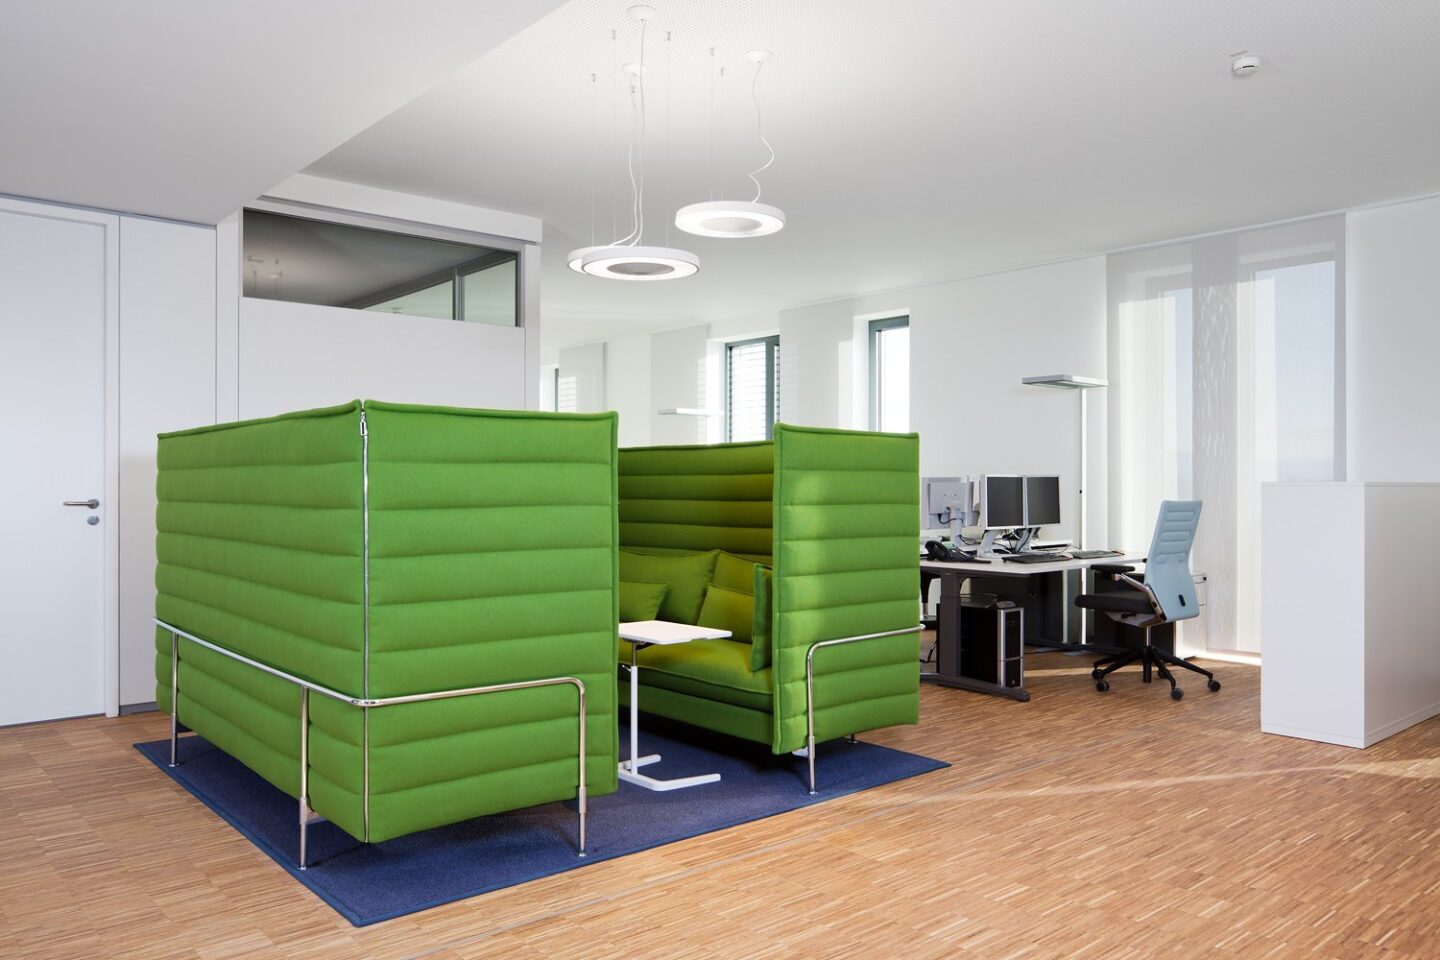 feco-feederle│partition walls│Disy Informationsystems Karlsruhe